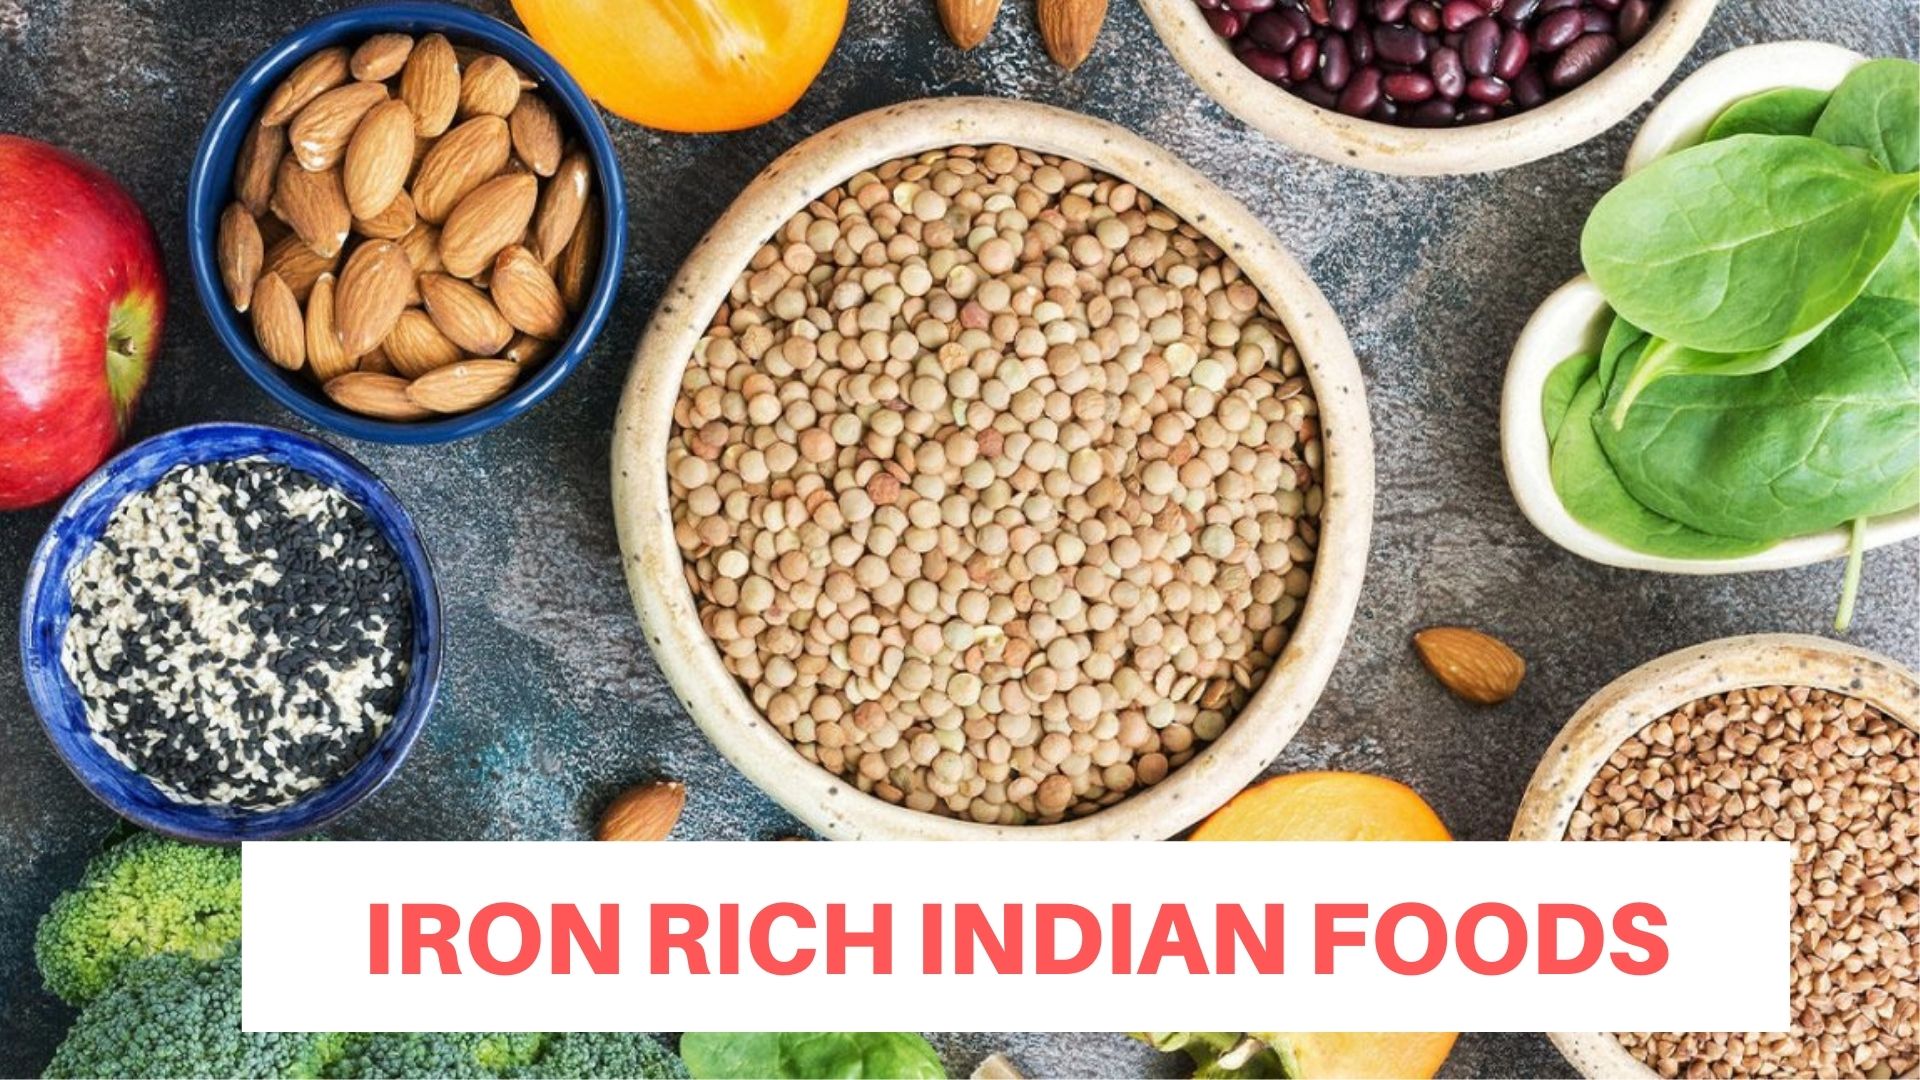 IRON RICH INDIAN FOODS